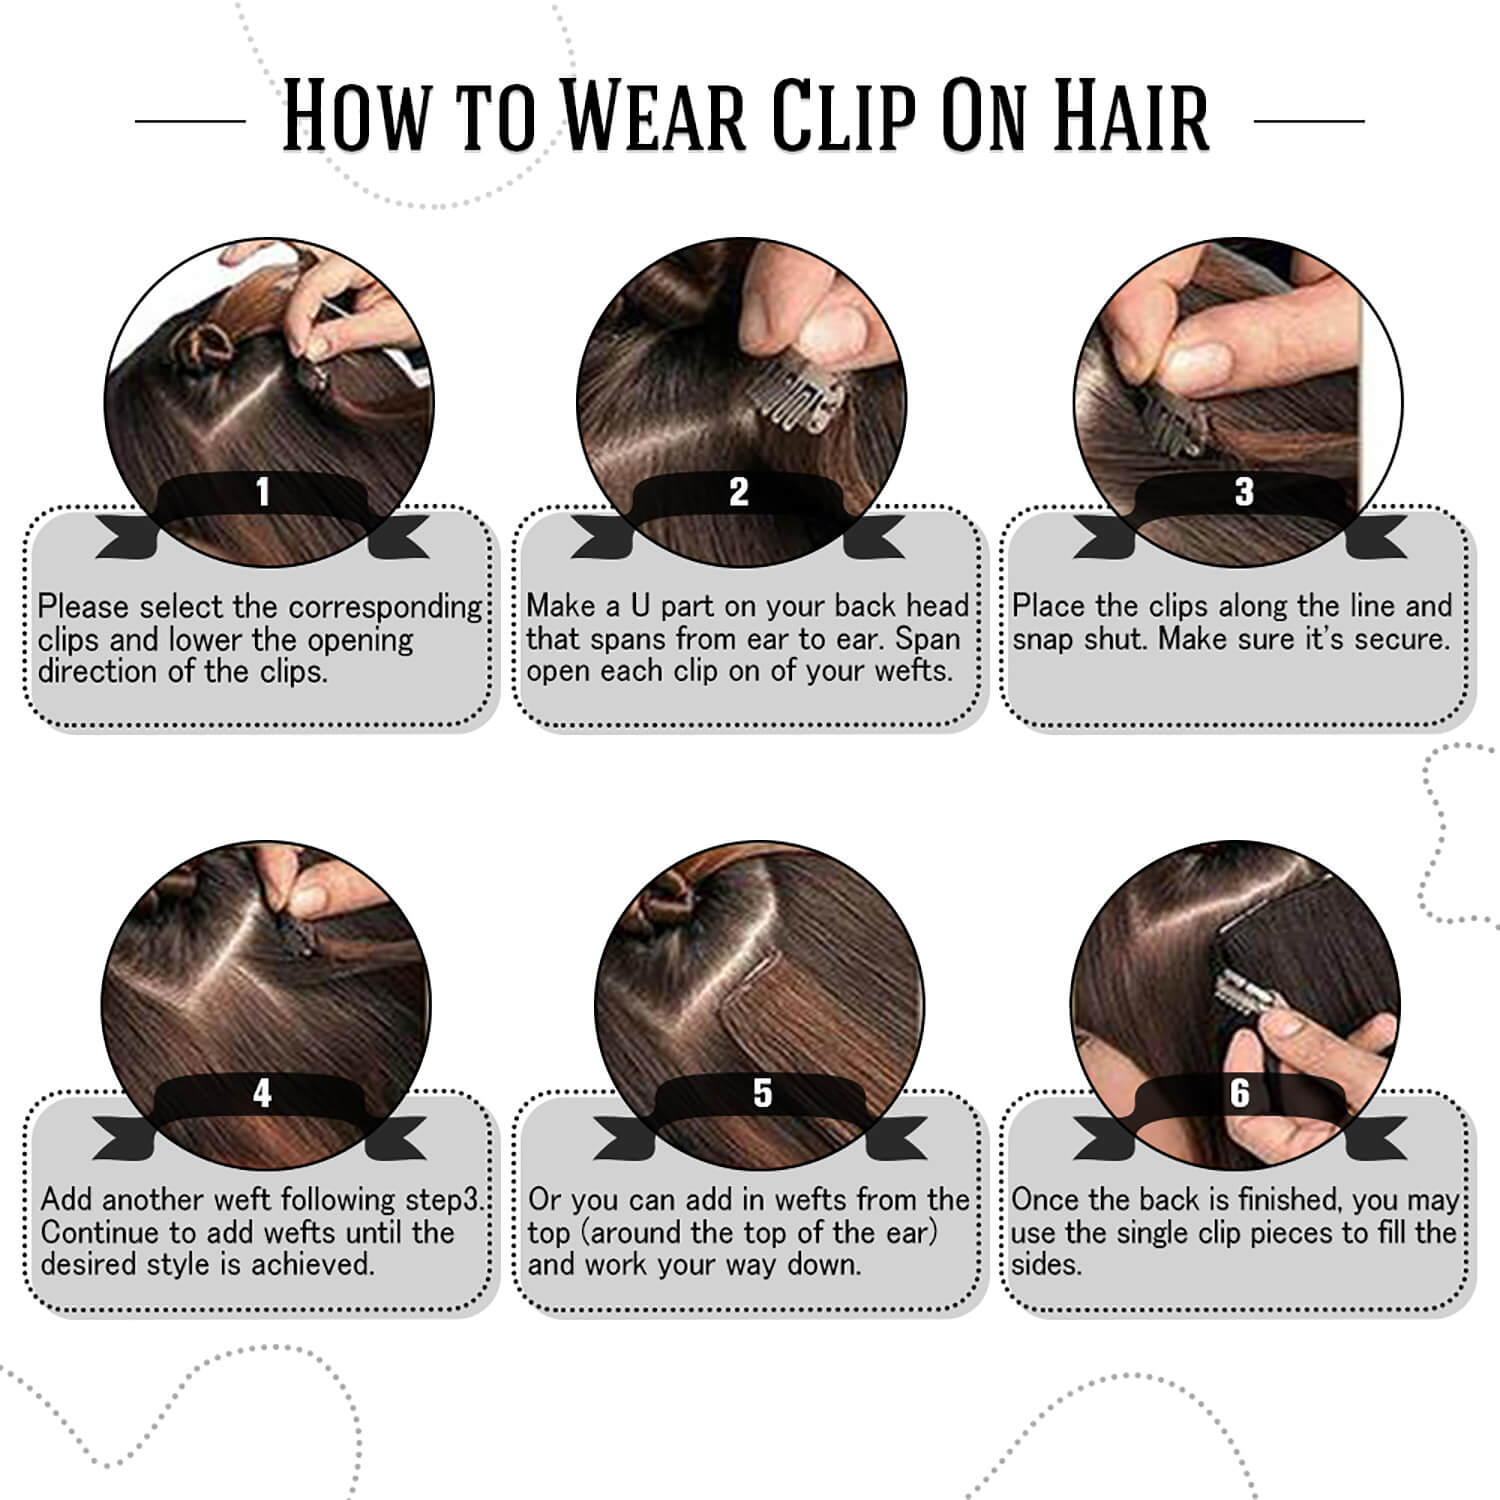 How to apply clip hair